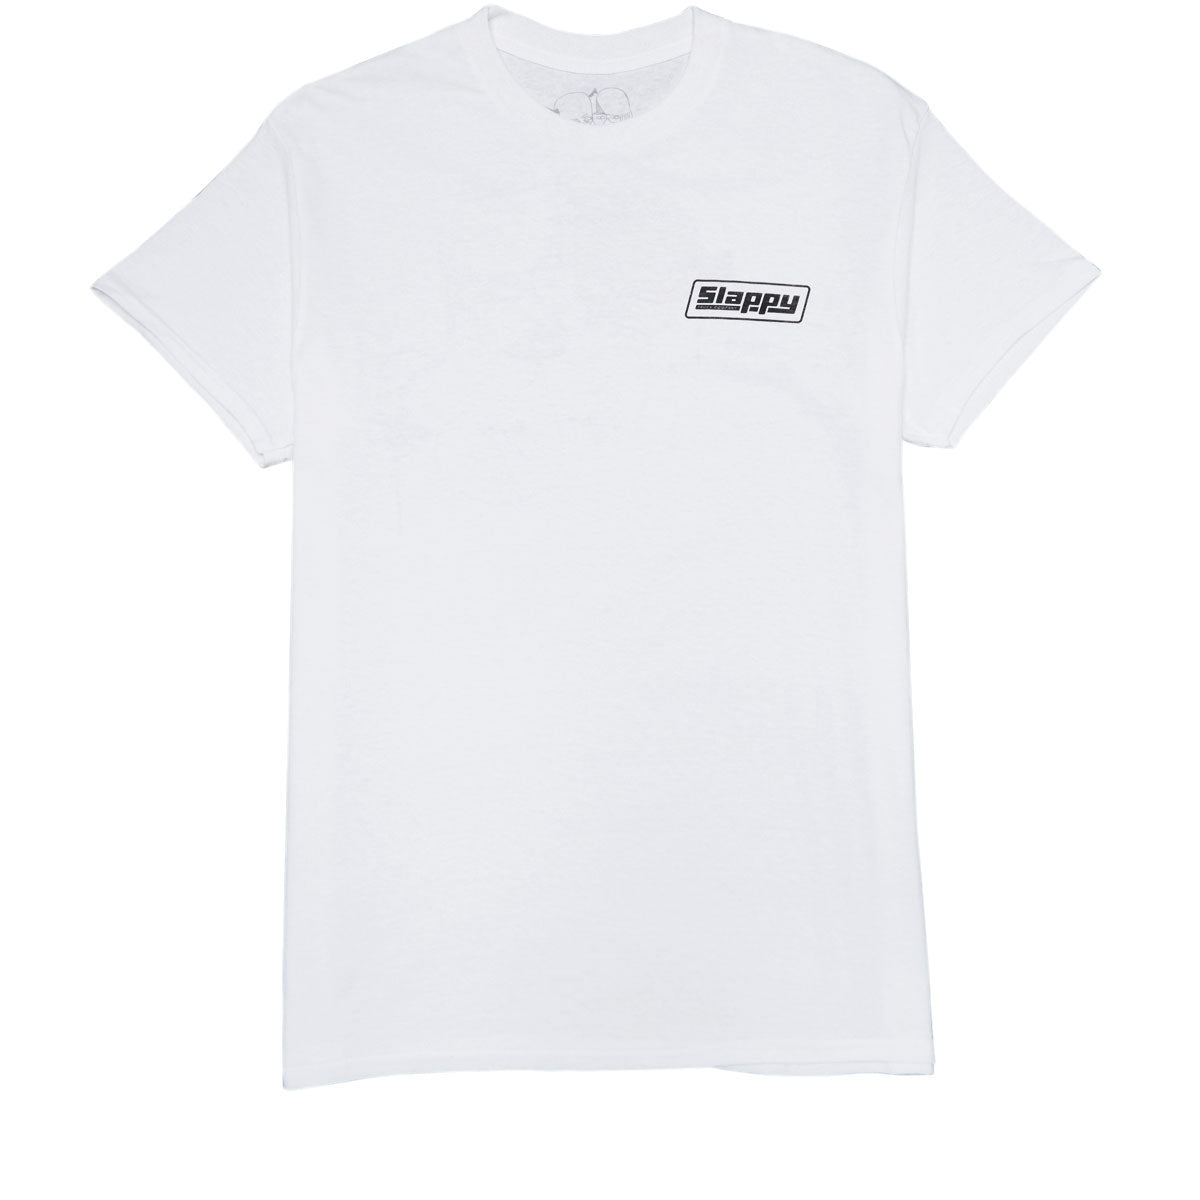 Slappy Haters T-Shirt - White image 2